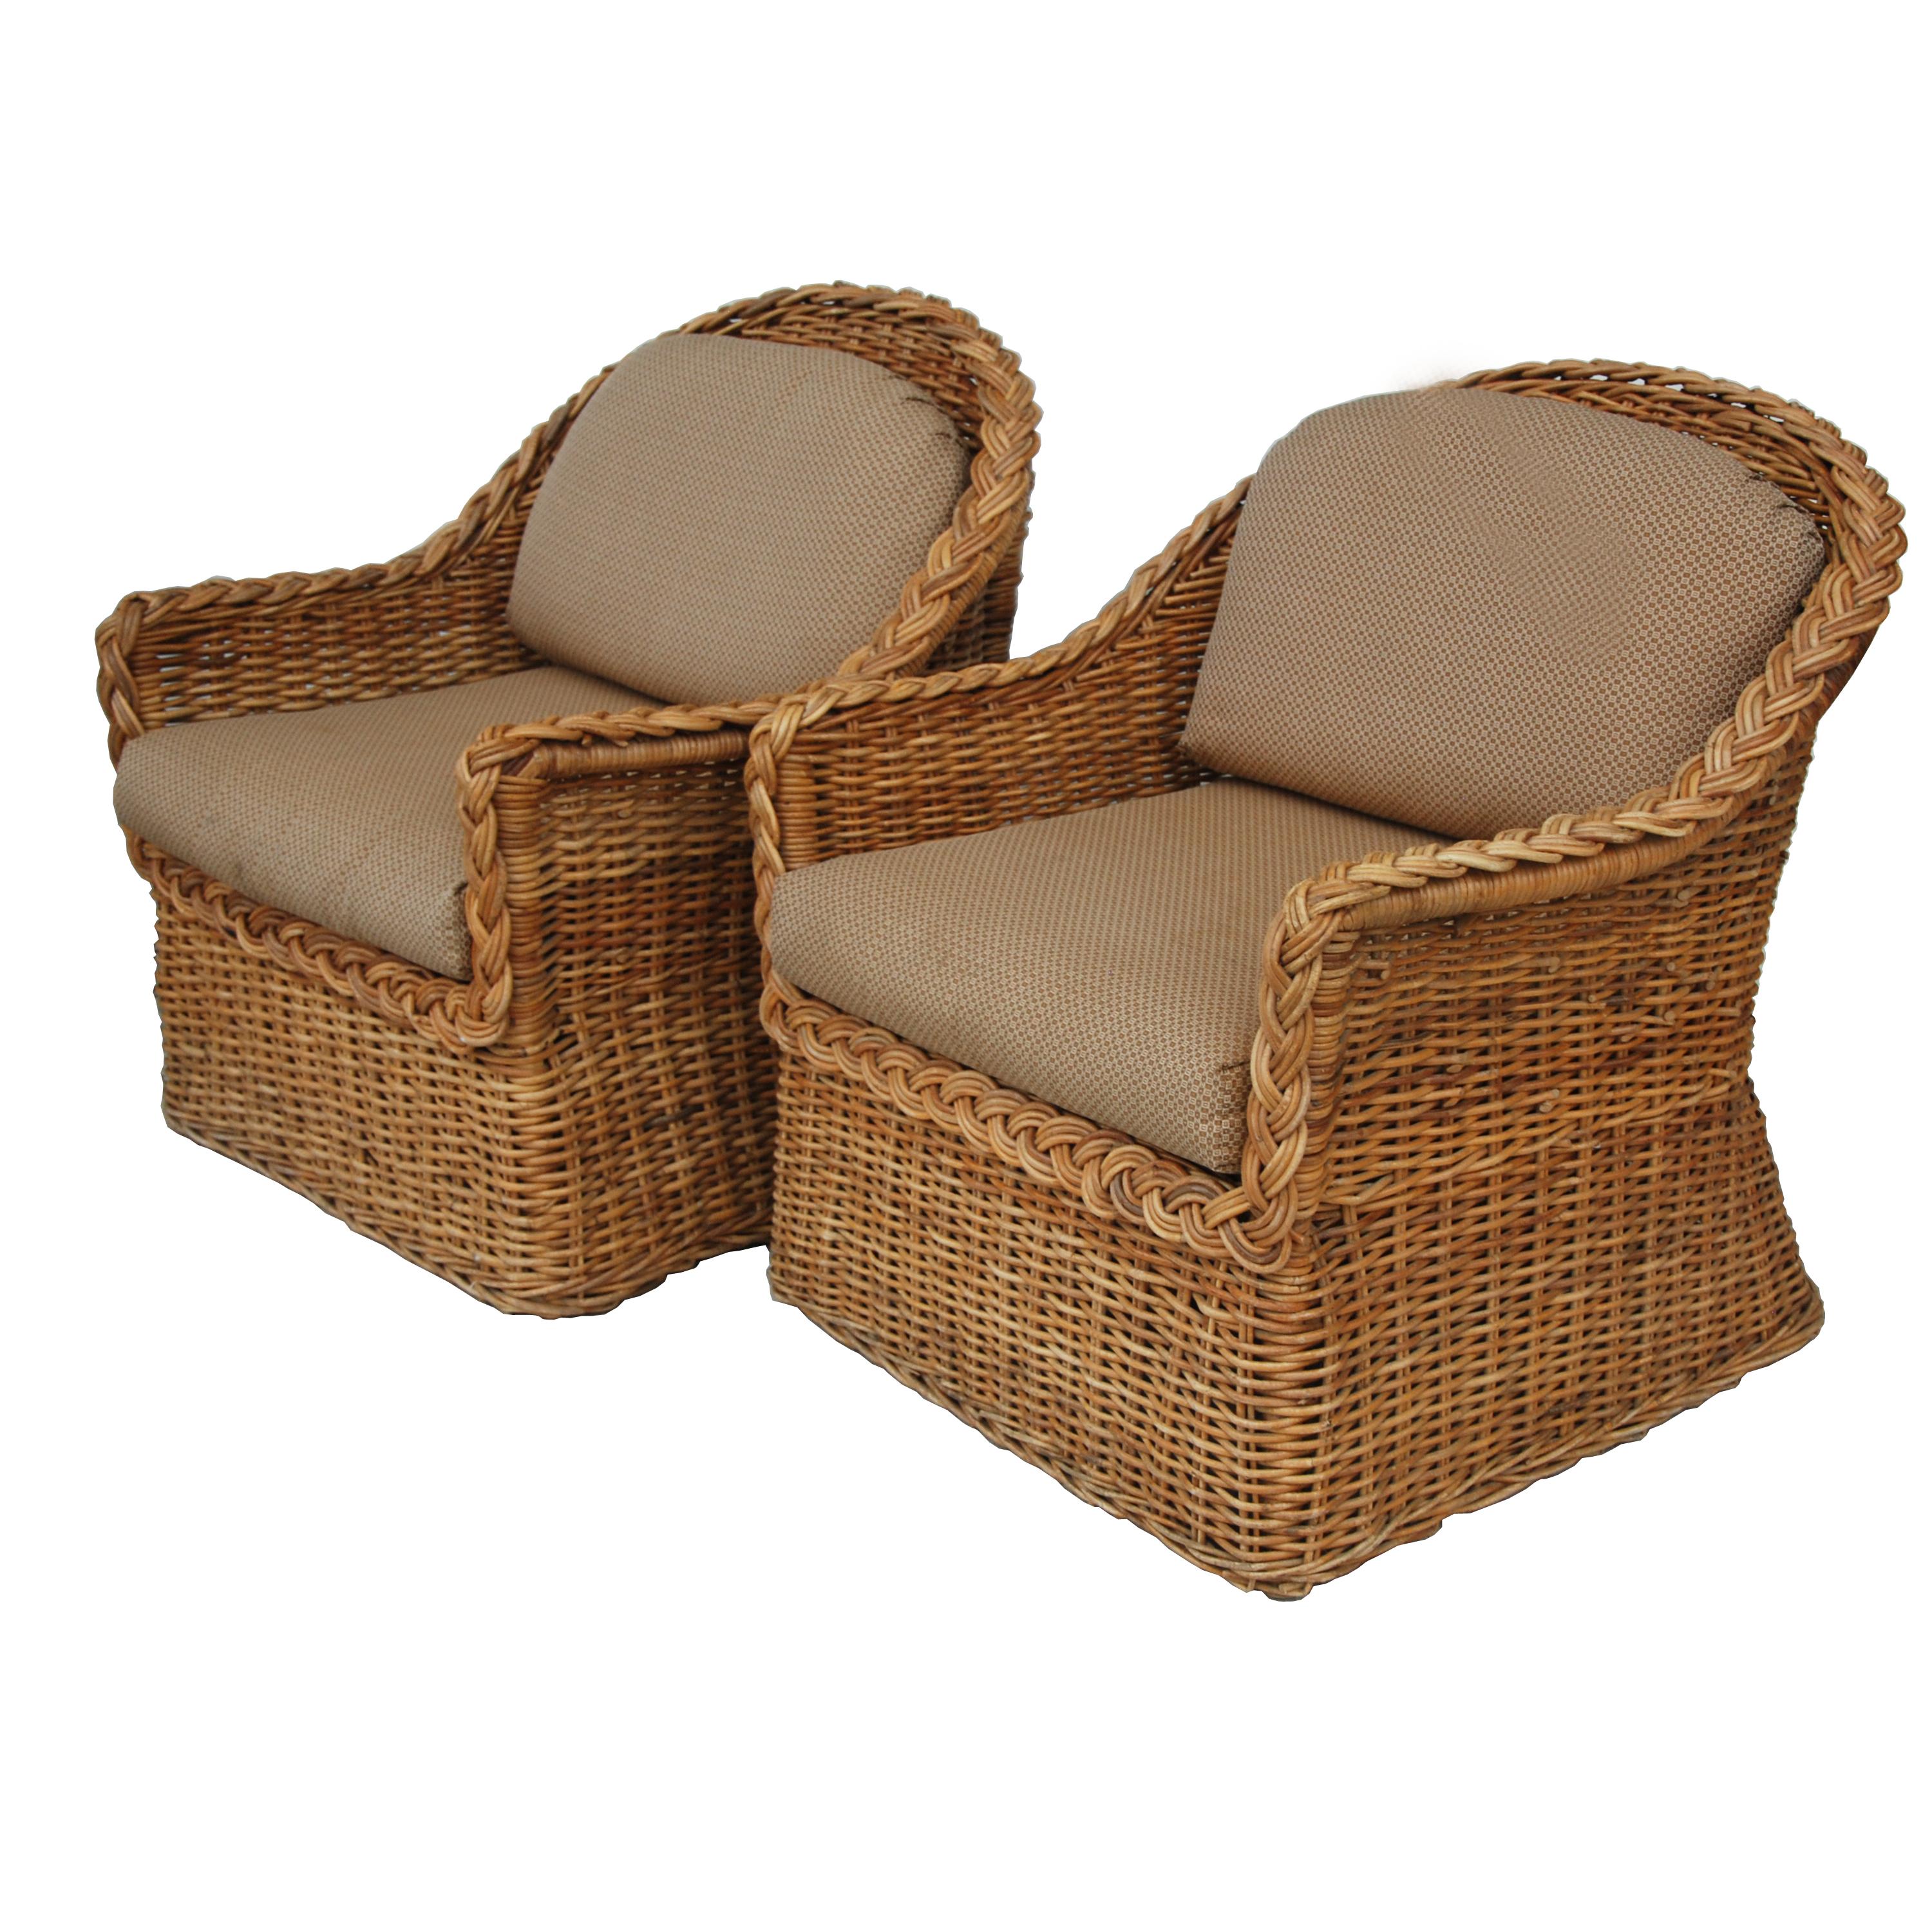 Pair of rattan lounge chairs
By The Wicker Works San Francisco, CA.

Italian woven and braided rattan barrel back lounge chairs from The Wicker Works of San Francisco, CA. Upholstered in the original cotton blend fabric.




Measure: Seat